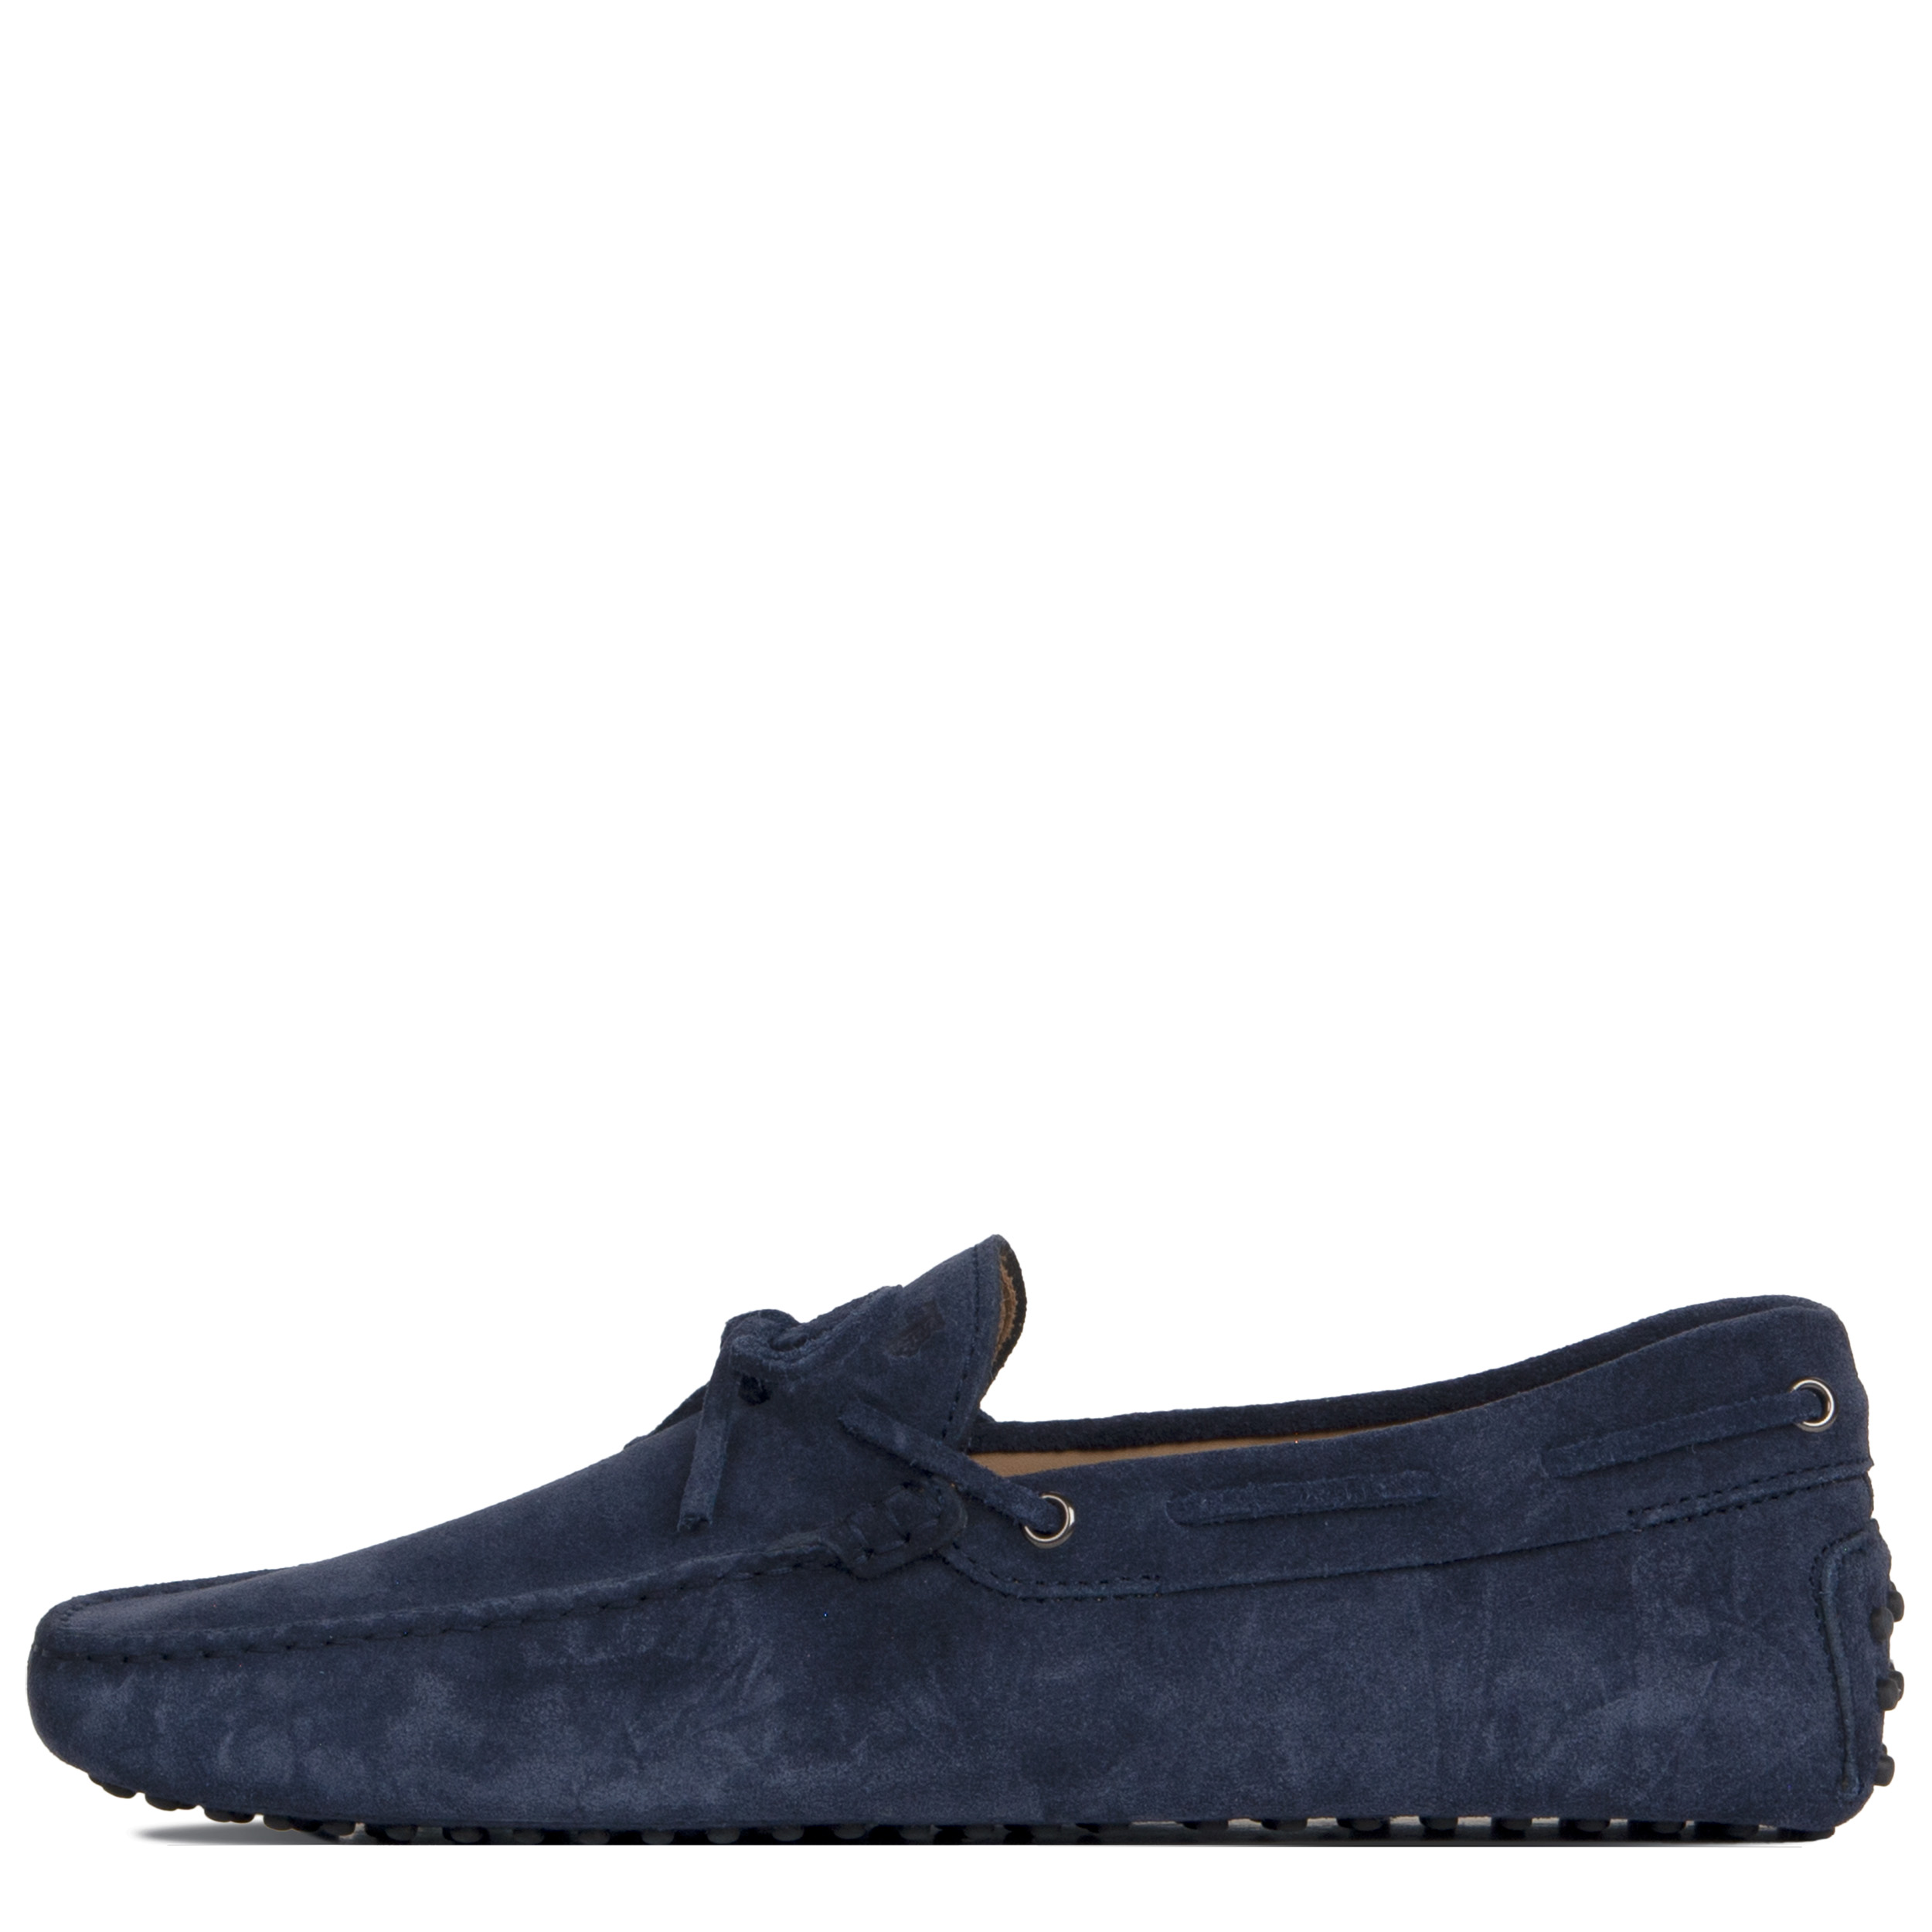 TODS Gommino Suede Driving Shoes Navy